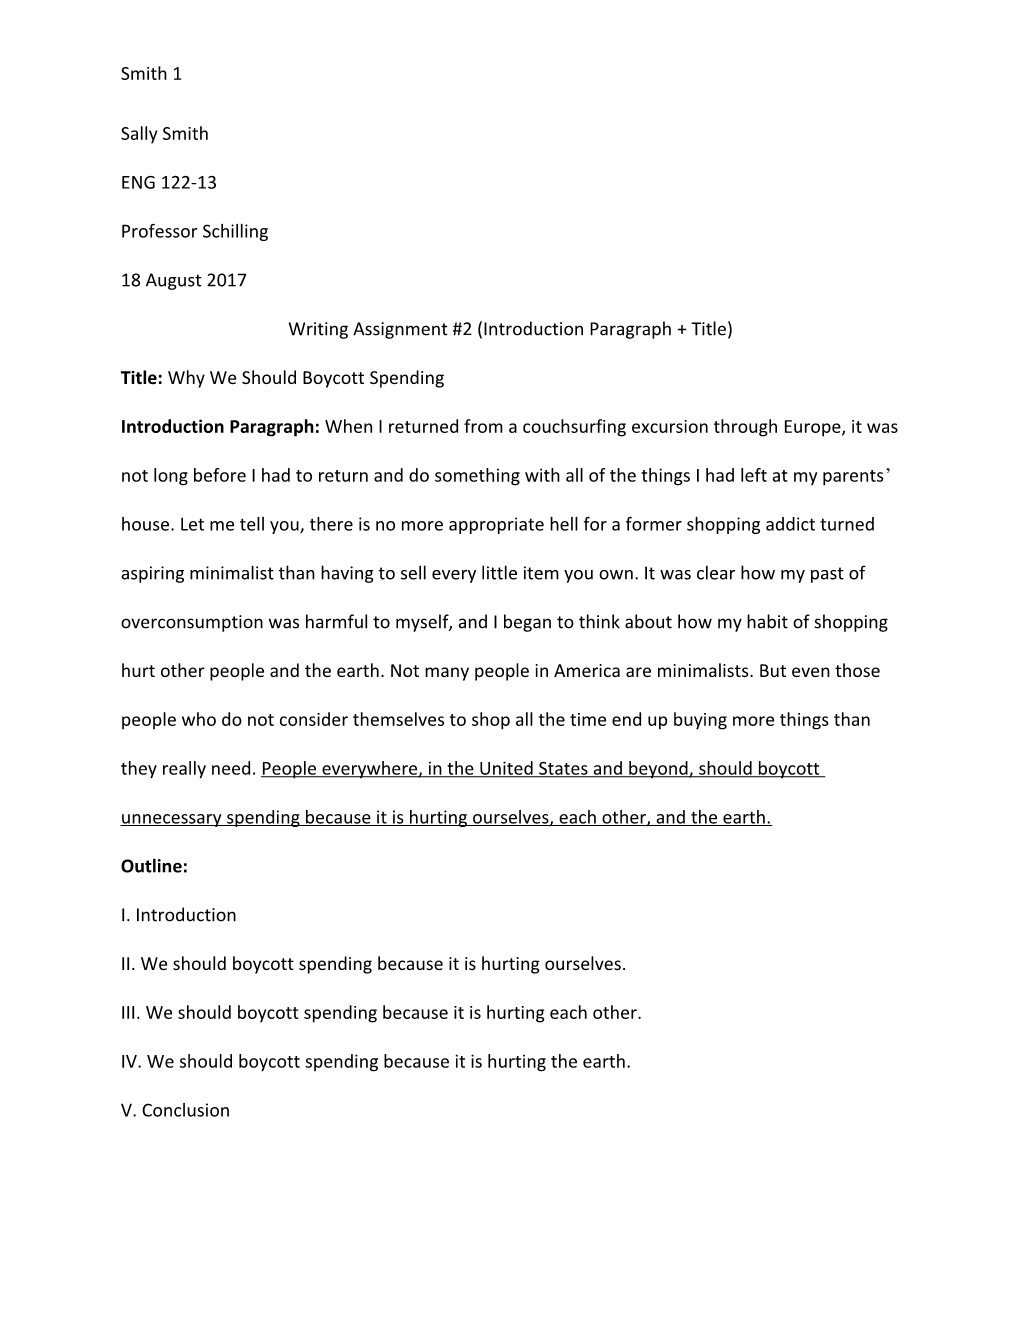 Writing Assignment #2 (Introduction Paragraph + Title)